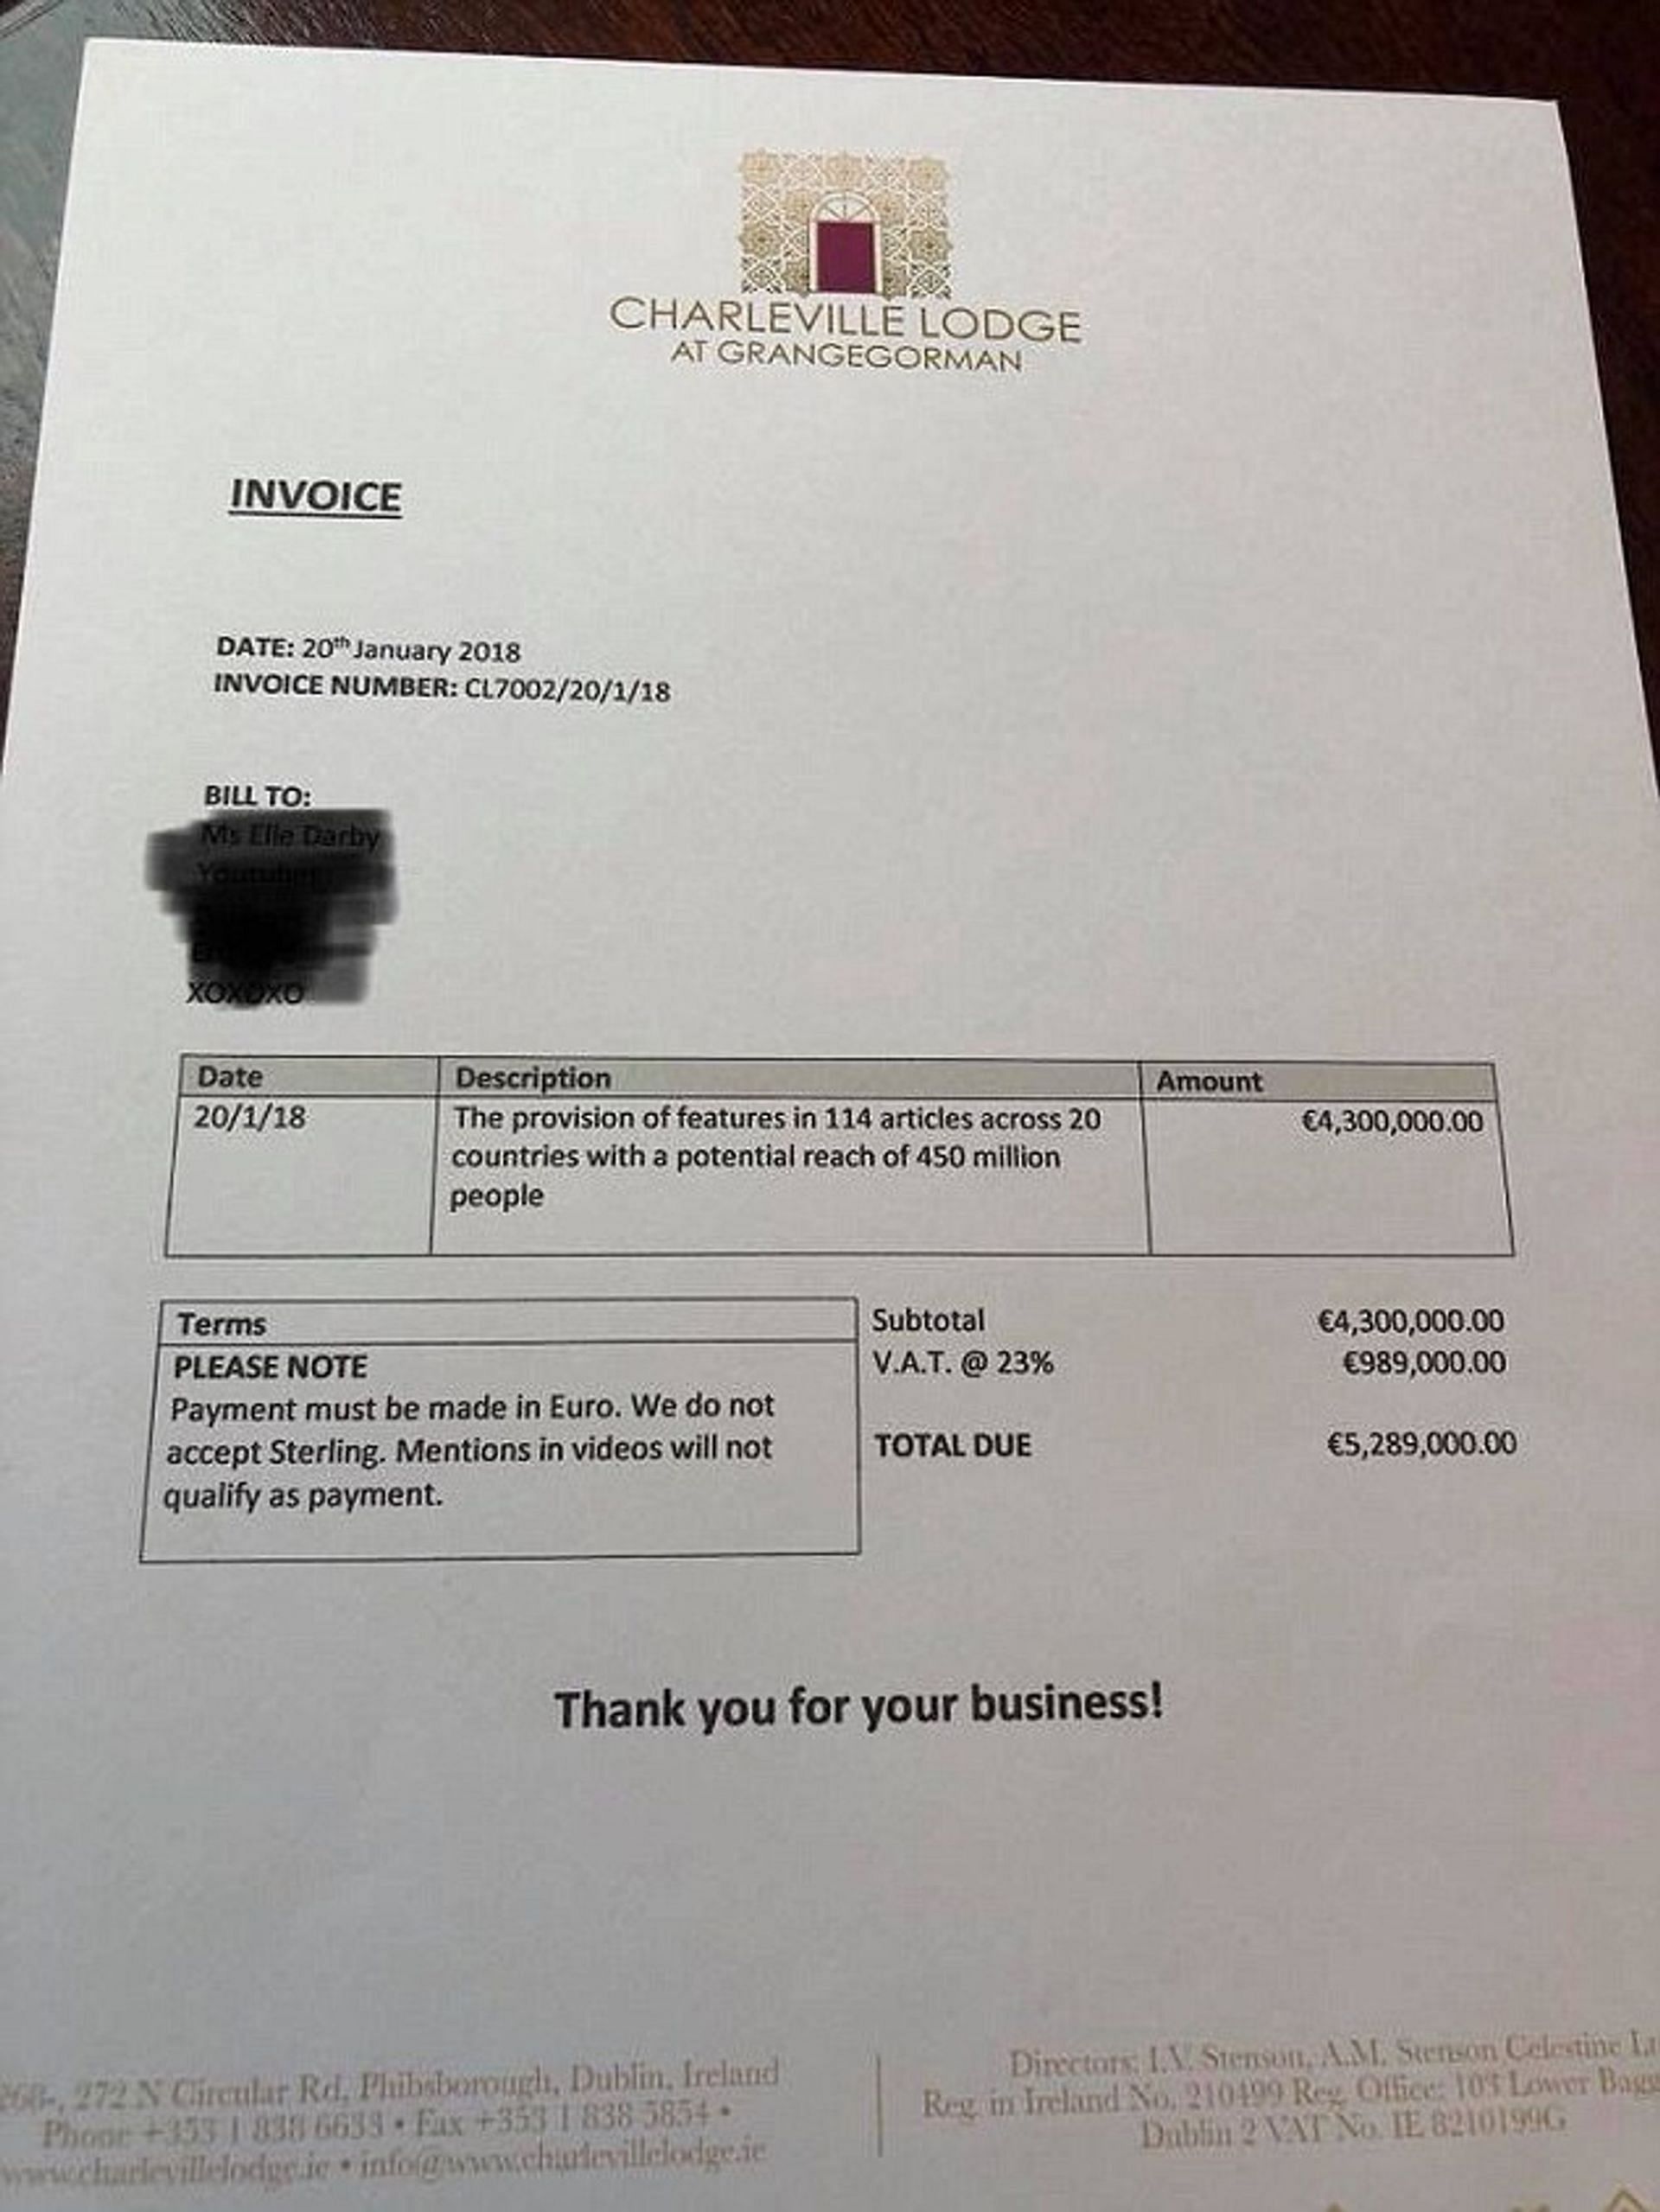 Elle Darby was charged for the exposure she received since the hotel&#039;s story went viral along with her being mentioned (Image via Charleville Lodge Hotel)